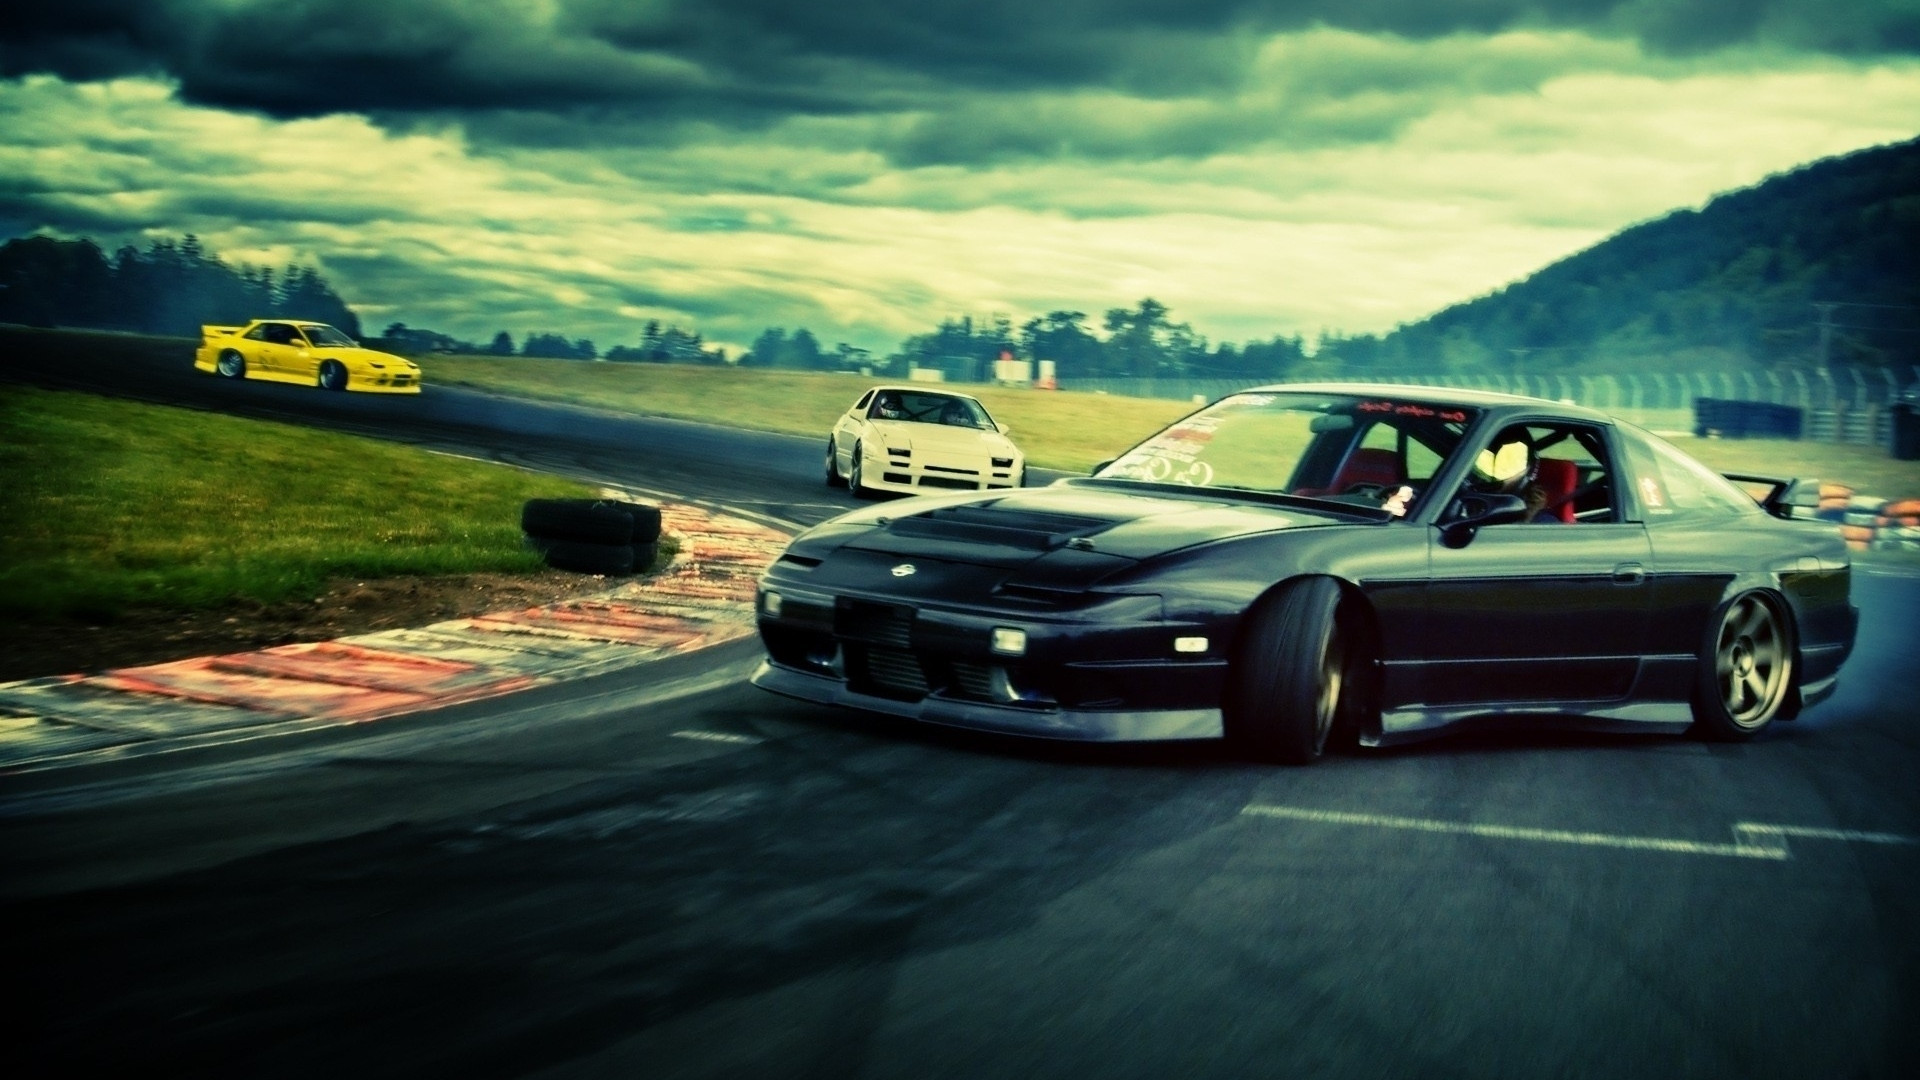 Drifting Cars Wallpaper Drifting Cars Backgrounds for PC